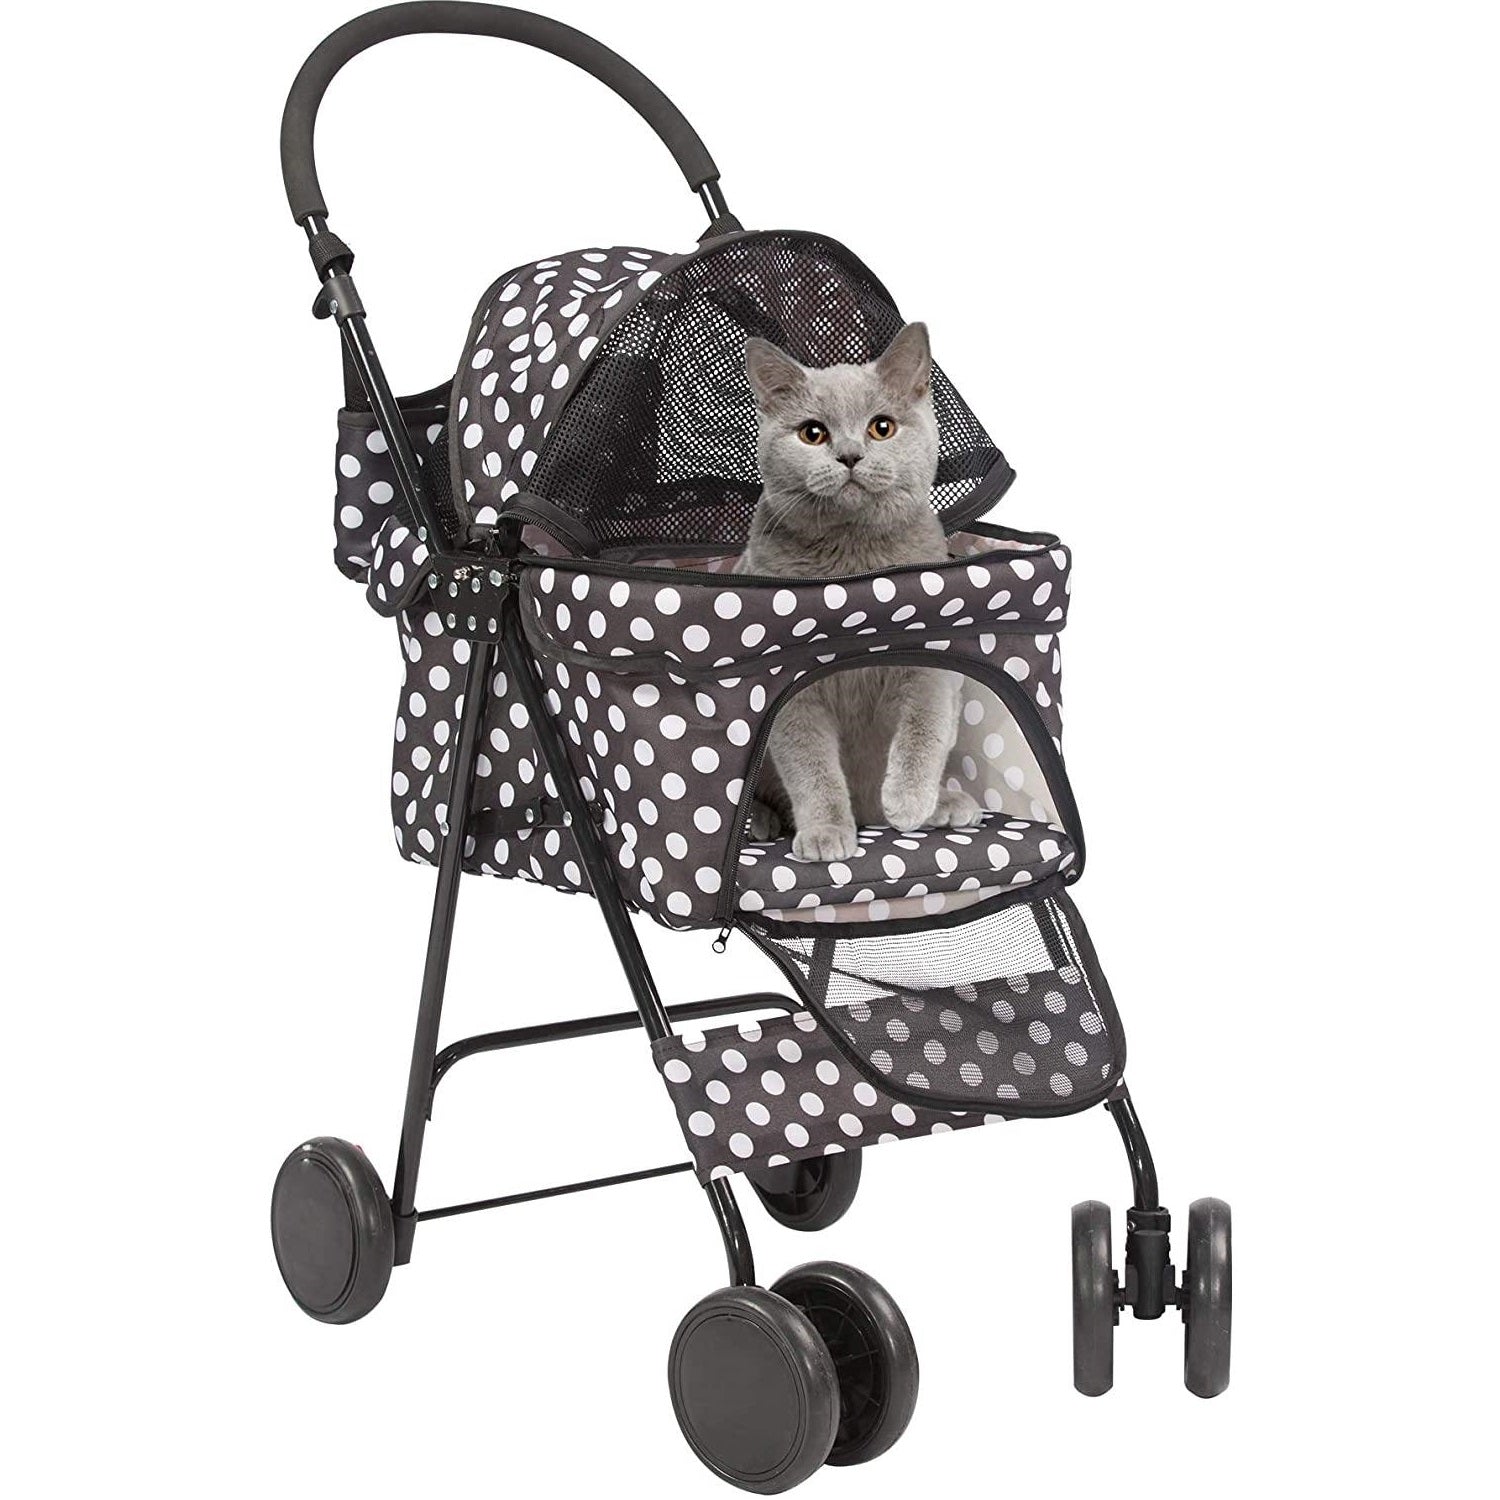 Folding Pet Stroller Kitten Puppy Travel Carriages for Small Cats and Dogs, Capacity 33lbs